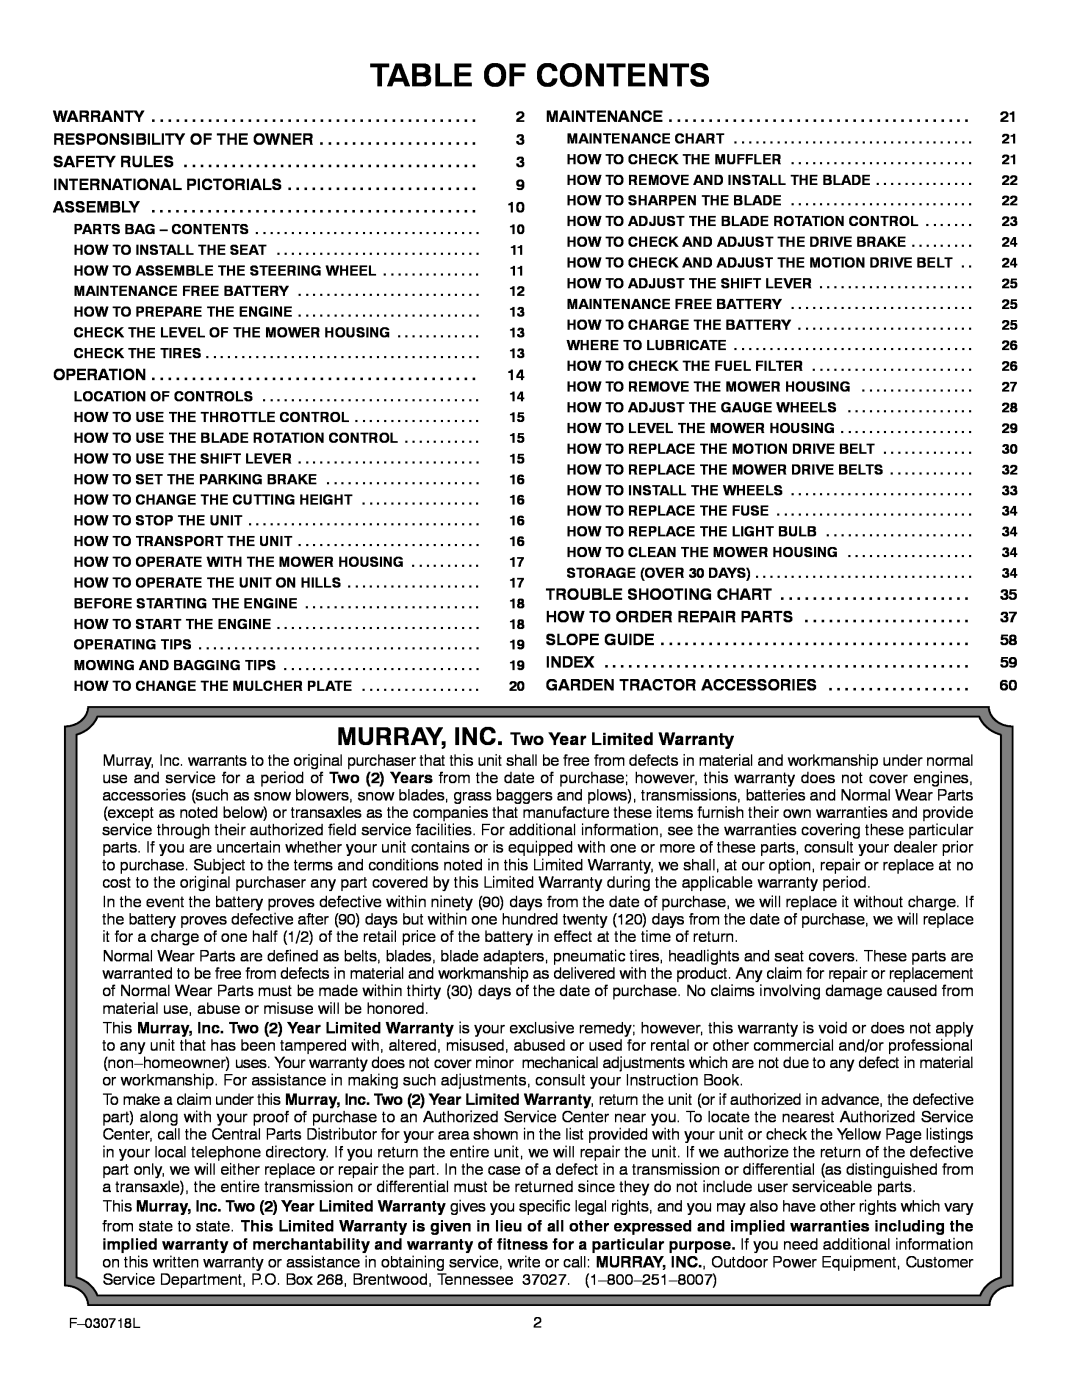 Murray 461000x8A manual Table Of Contents, MURRAY, INC. Two Year Limited Warranty 